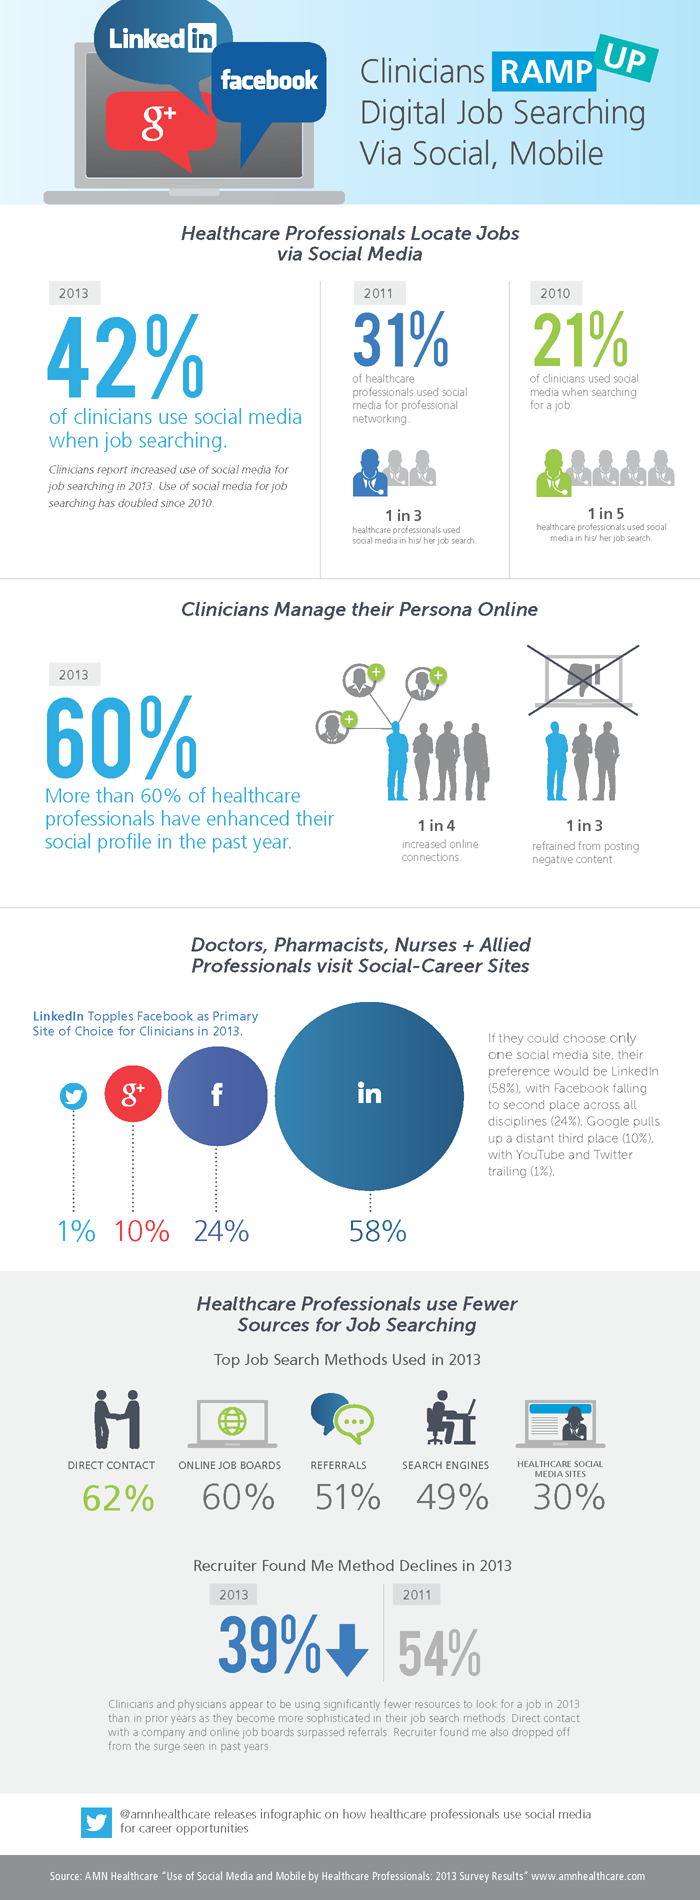  HCP Use of Social Media for Recruitment [INFOGRAPHIC]